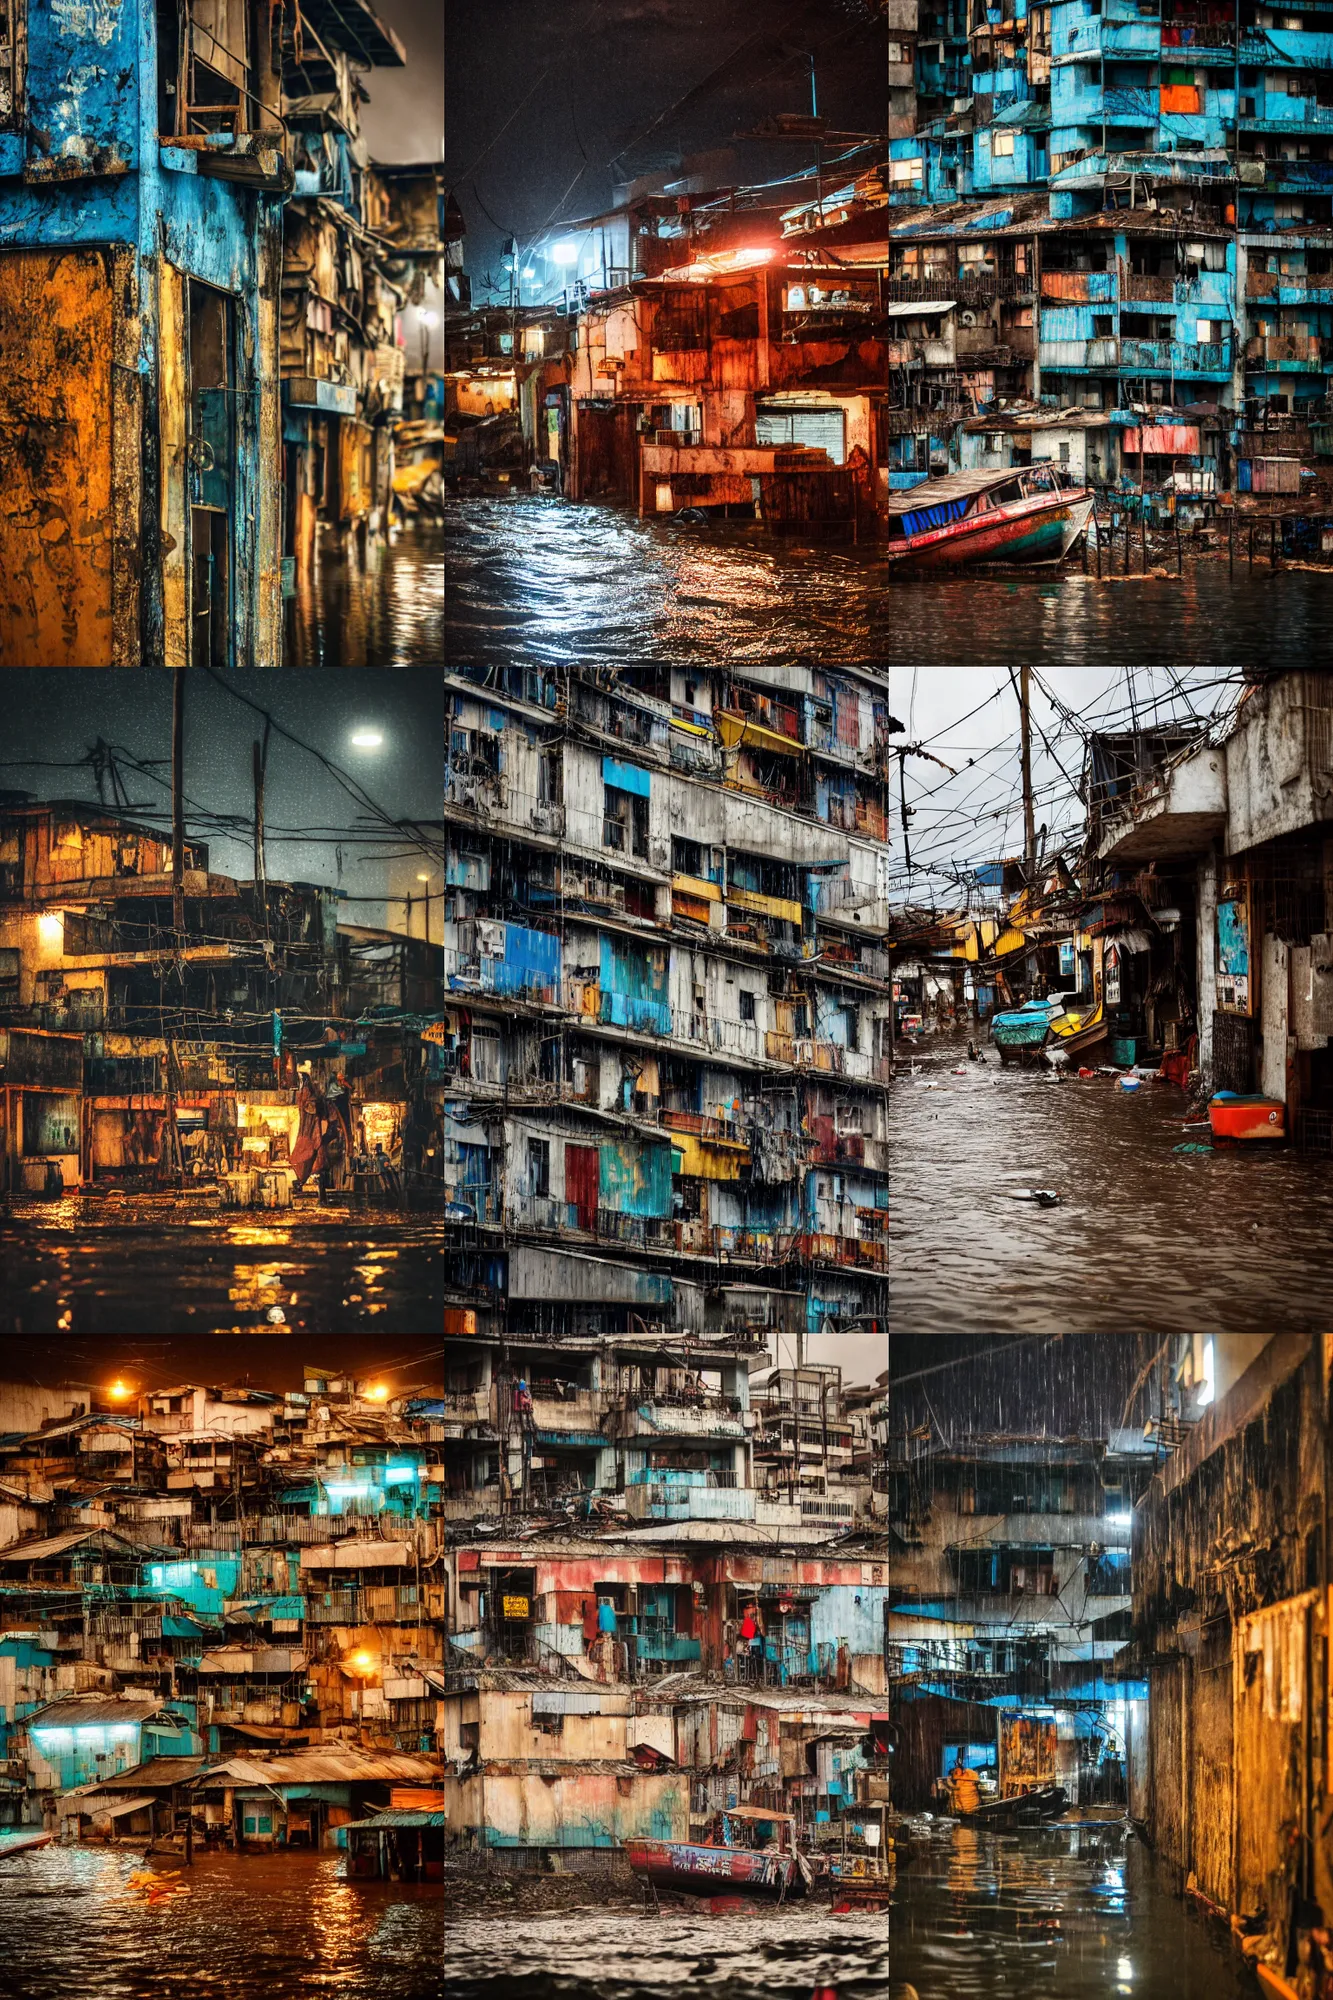 Prompt: travel photography, a close up 3 5 mm photo of a dystopian cyberpunk motel made of scrap wood and scrap metal in a village of favelas, flooded fishing village, at night, raining, boats in the water, epic lighting, epic composition, depth of field, bokeh, upscaled to 4 k